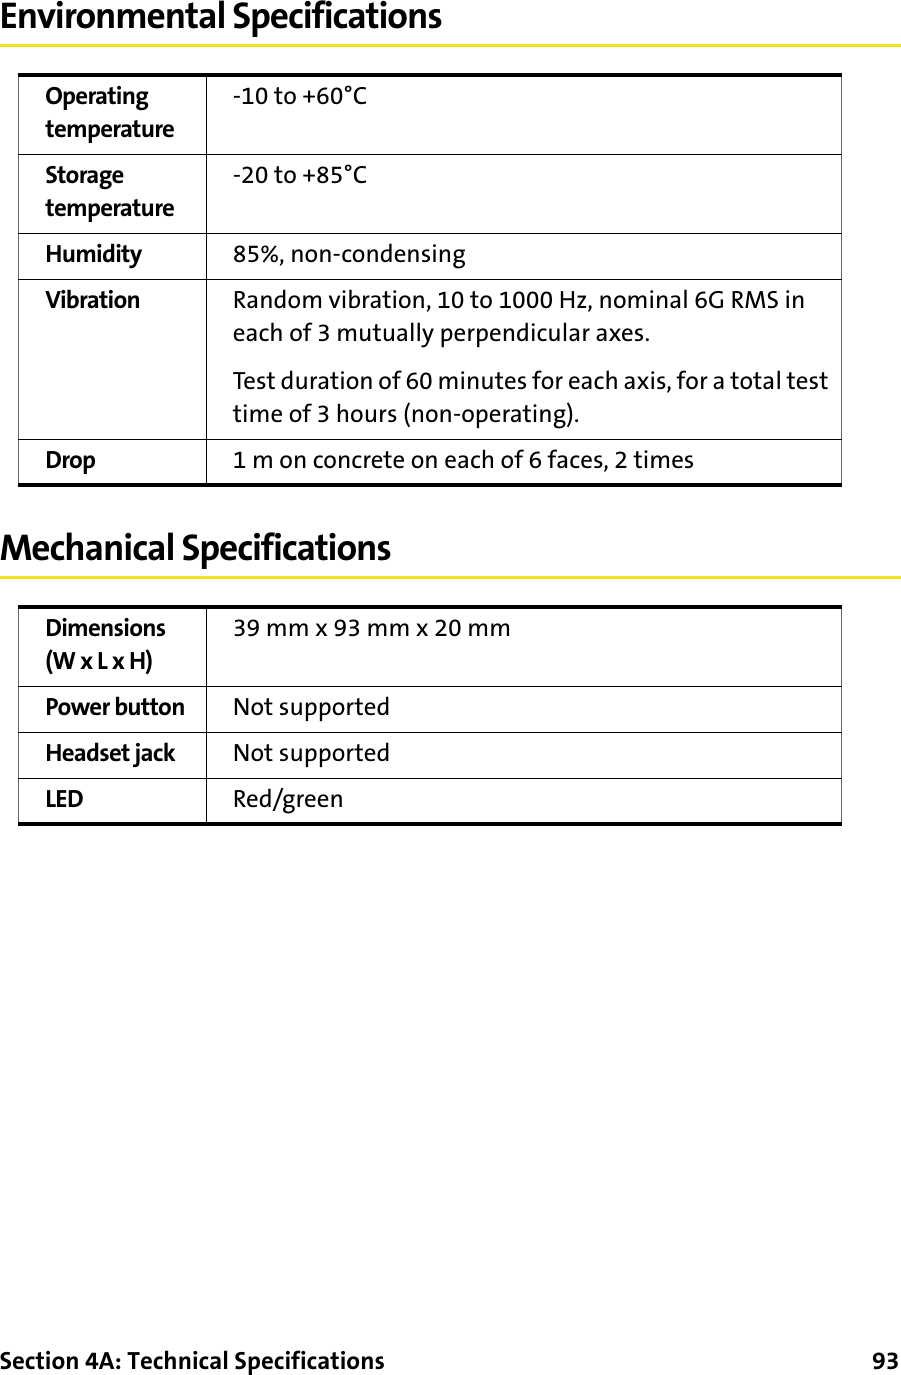 Section 4A: Technical Specifications      93Environmental SpecificationsMechanical SpecificationsOperating temperature-10 to +60°CStorage temperature-20 to +85°CHumidity 85%, non-condensingVibration Random vibration, 10 to 1000 Hz, nominal 6G RMS in each of 3 mutually perpendicular axes.Test duration of 60 minutes for each axis, for a total test time of 3 hours (non-operating).Drop 1 m on concrete on each of 6 faces, 2 timesDimensions(W x L x H)39 mm x 93 mm x 20 mmPower button Not supportedHeadset jack Not supportedLED Red/green